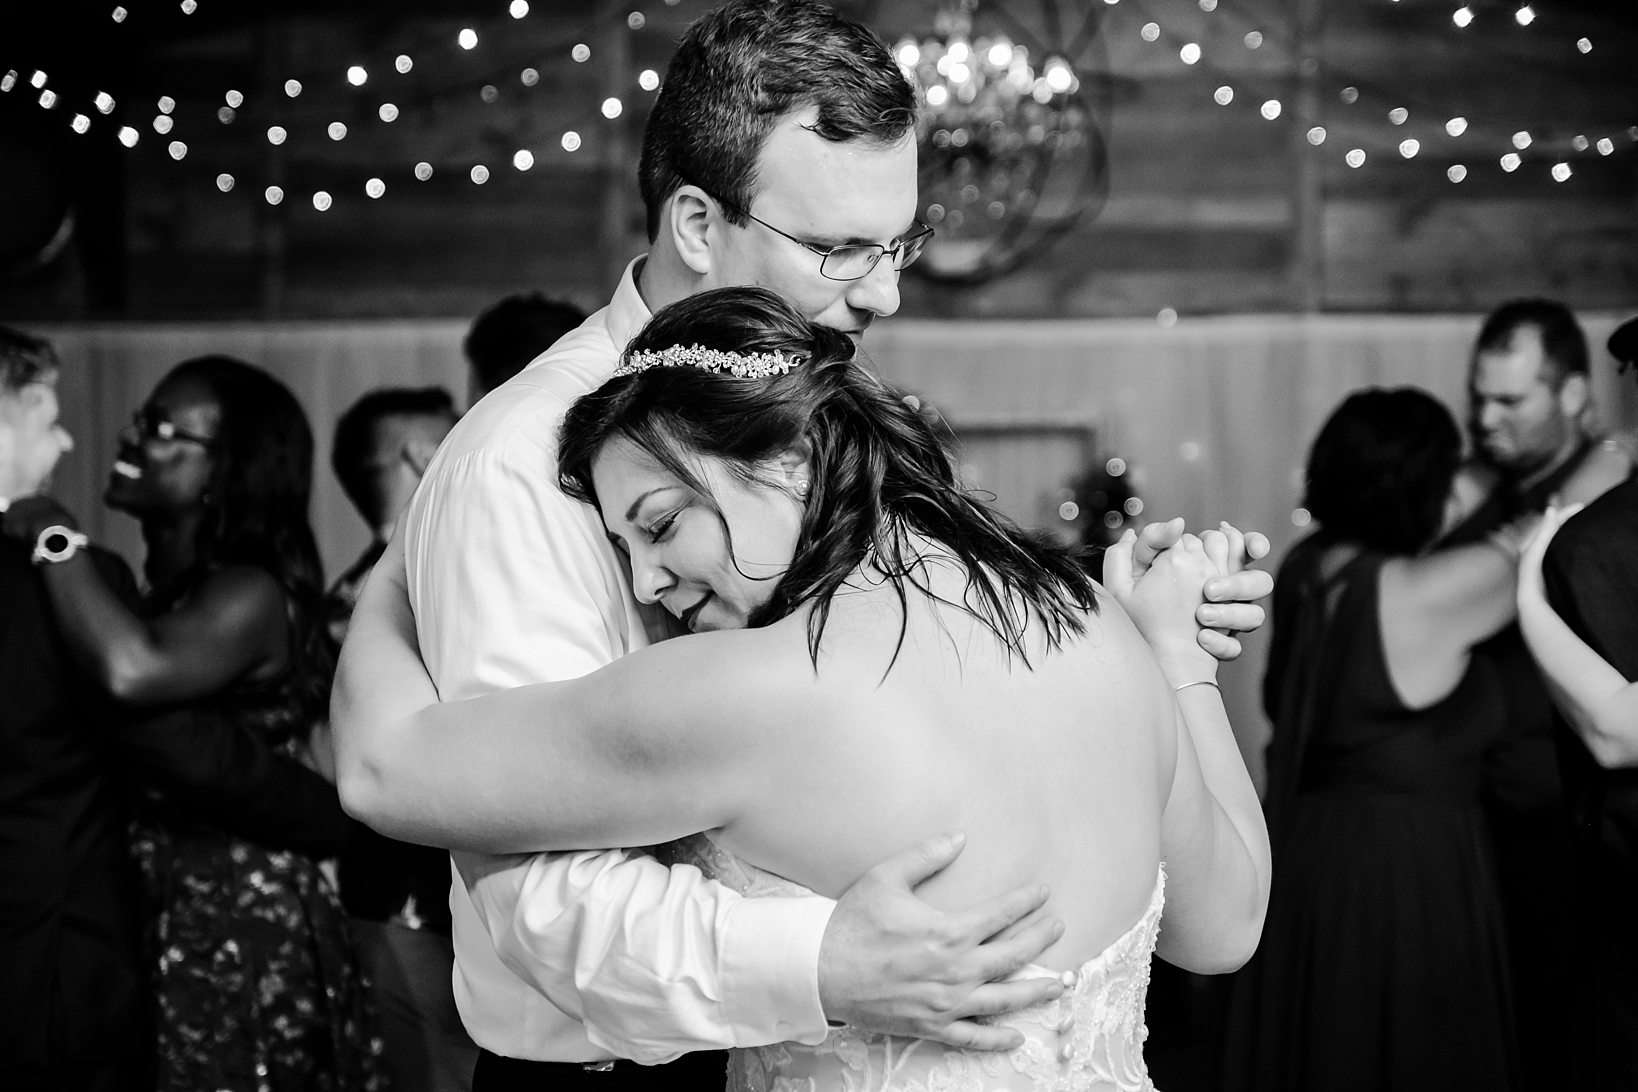 Last dance photographed by Sarah and Ben Photography in black and white